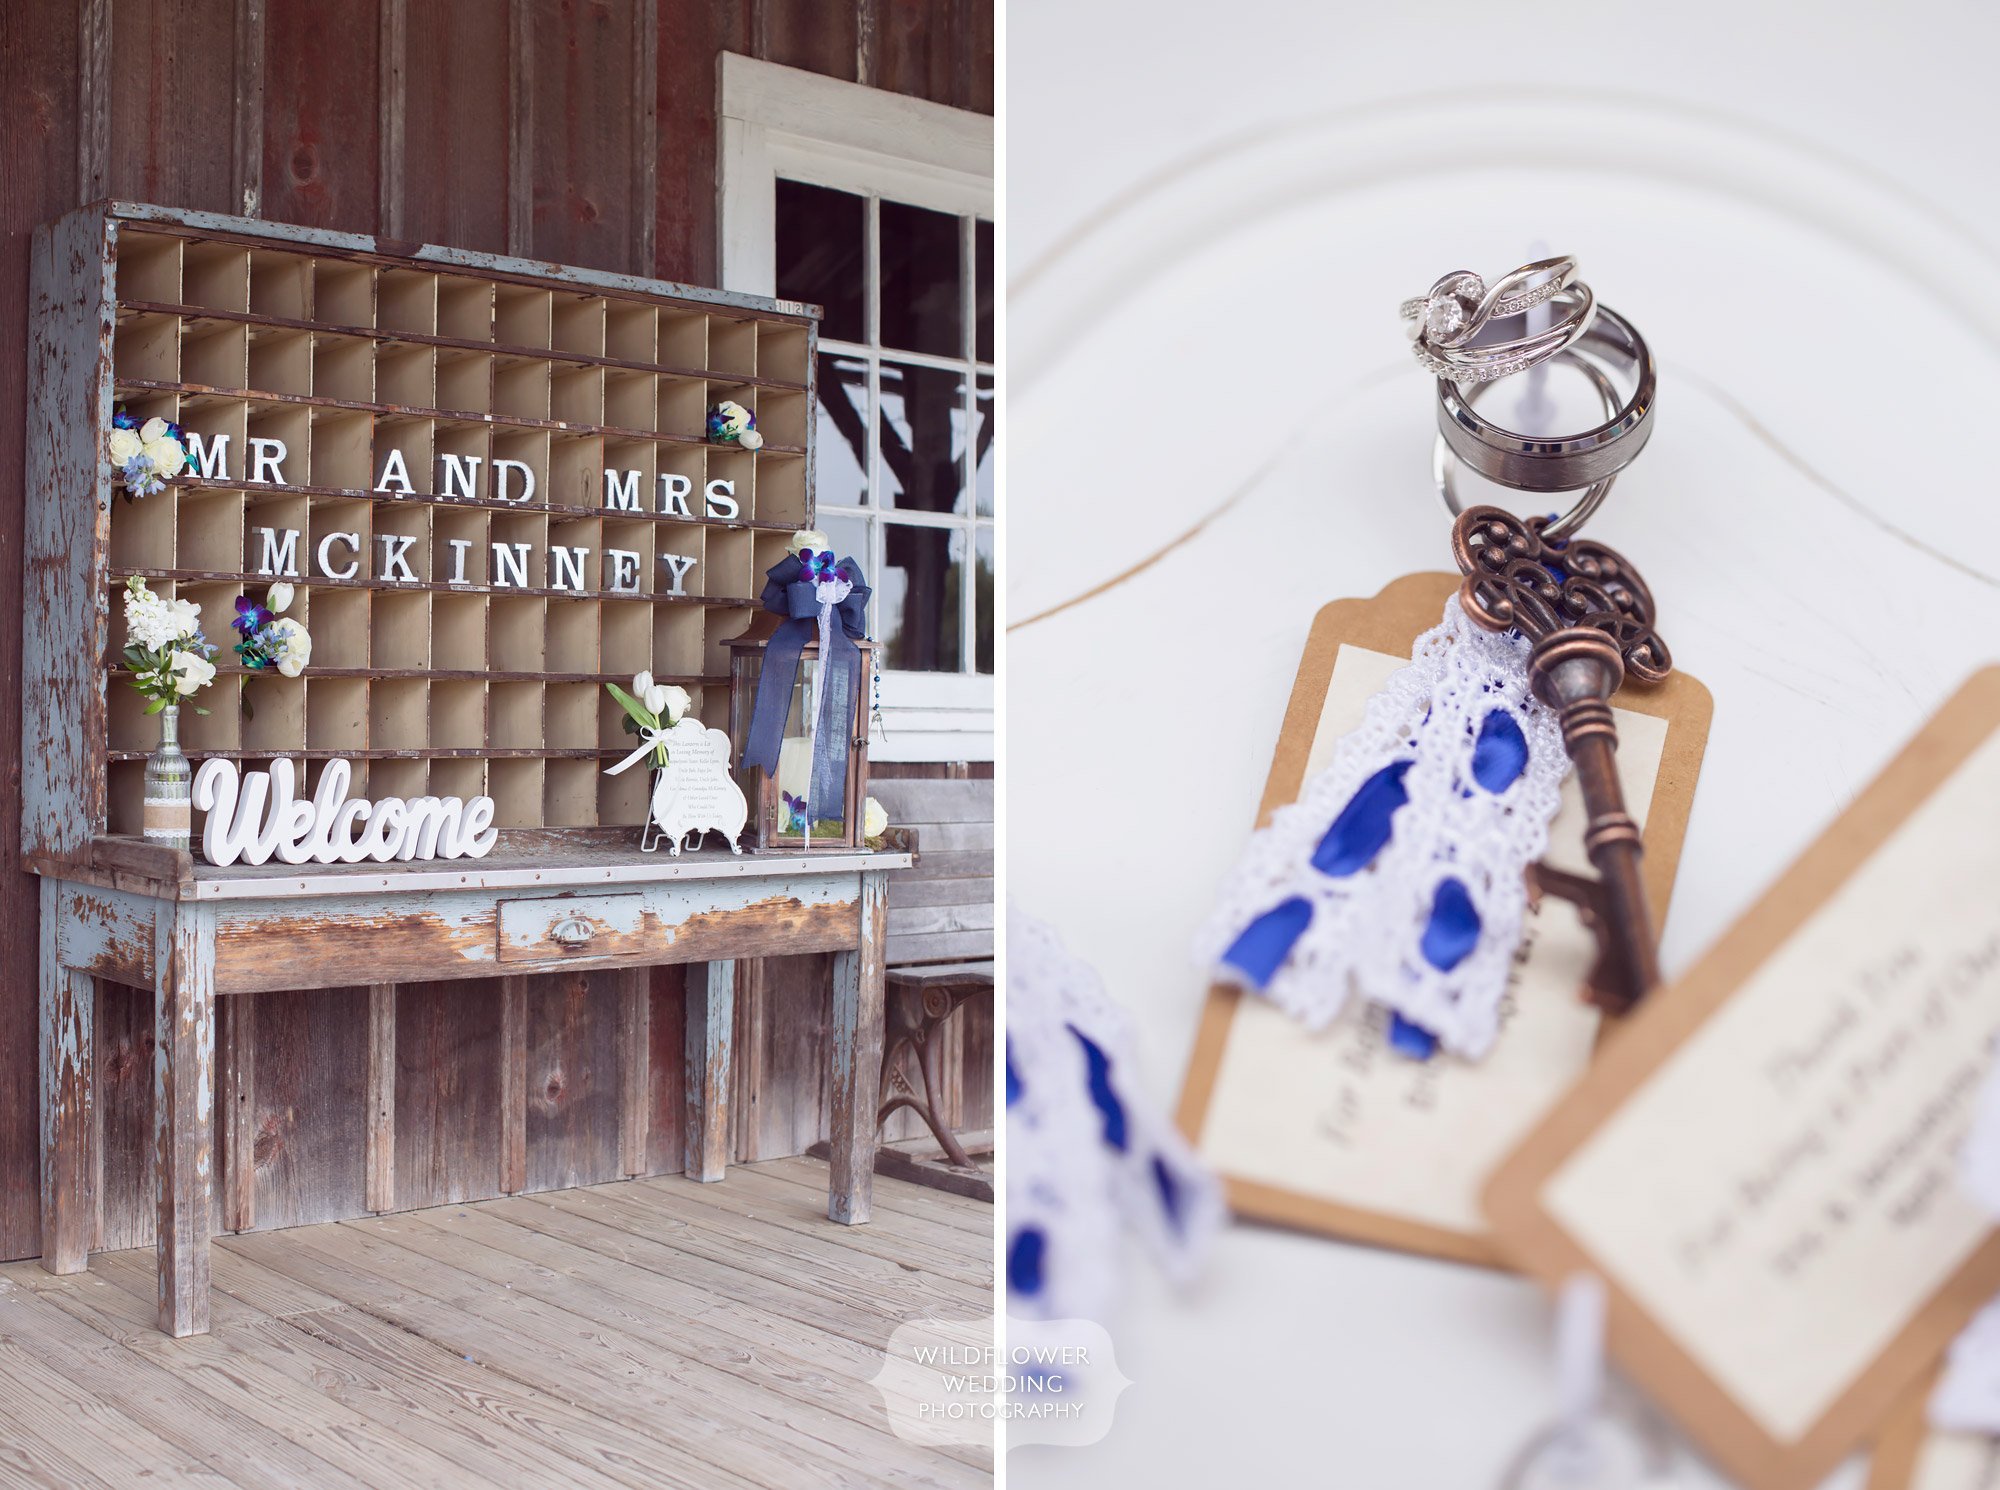 Great idea for a farm wedding with an old postal mail organizer and an antique door for escort cards.